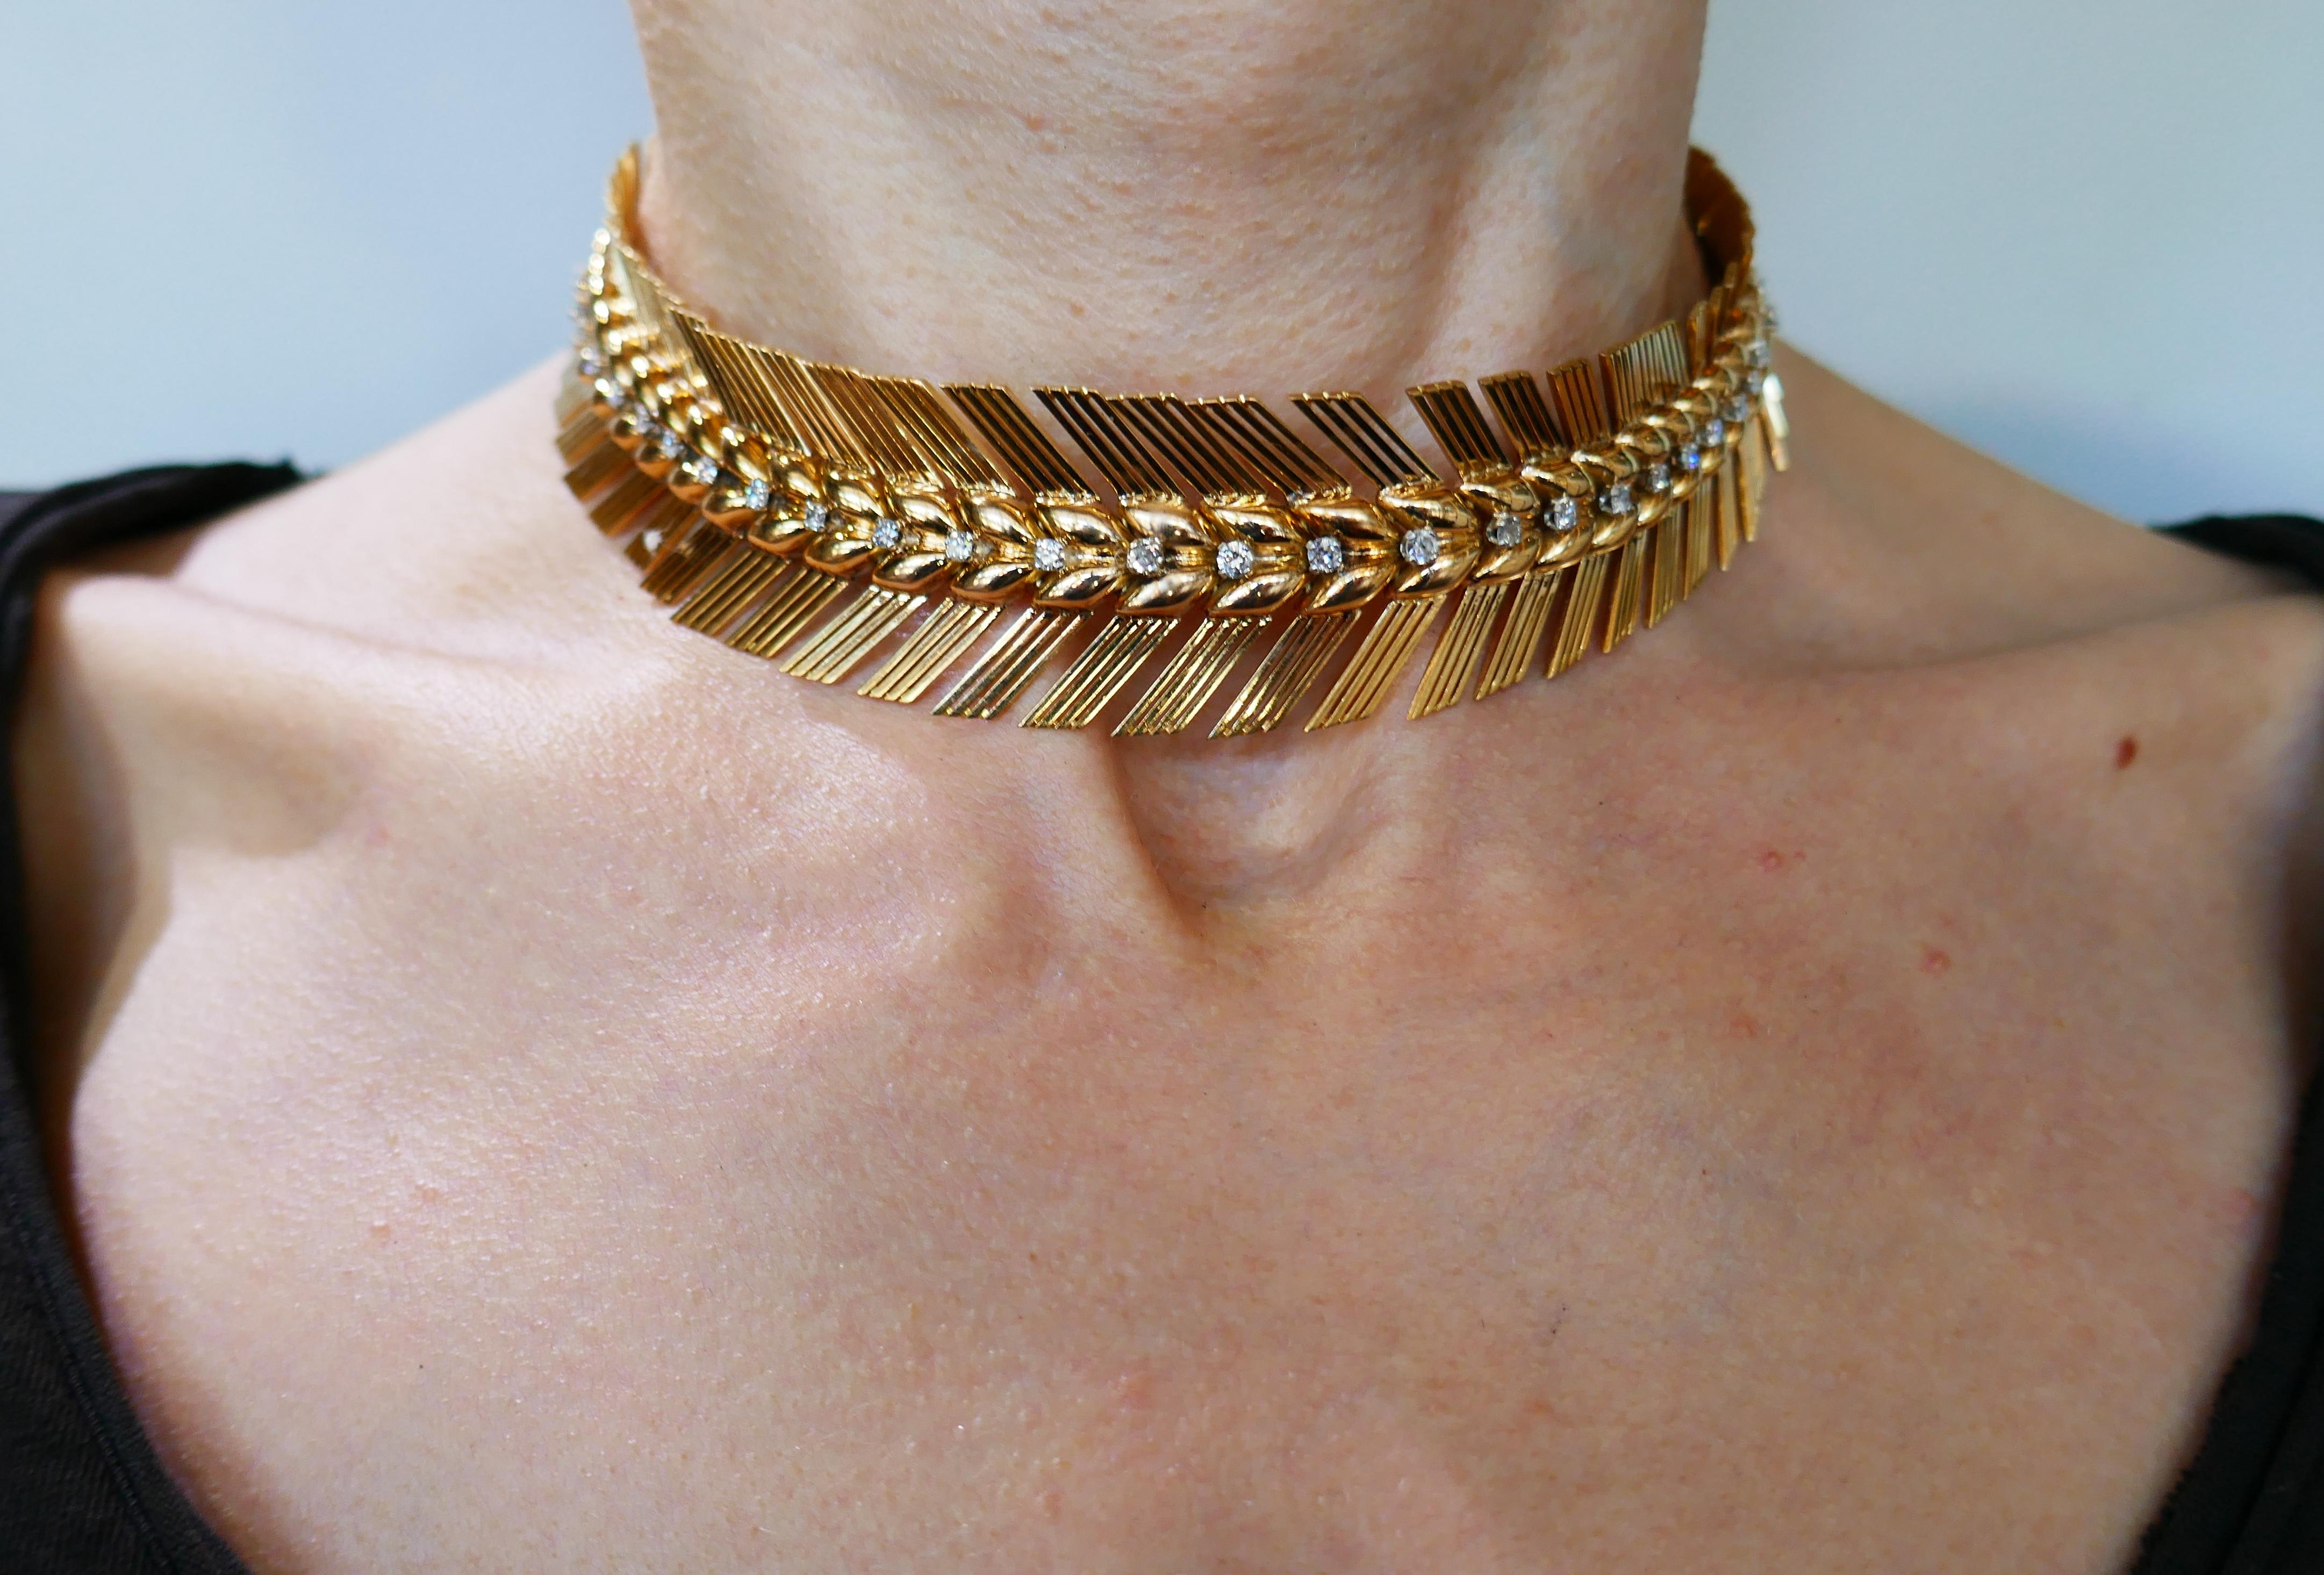 Vintage choker necklace created by Pierre Sterle in Paris in the 1940s.  French chic, feminine and wearable, the necklace is a great addition to your jewelry collection. 
The necklace is made of 18 karat yellow gold and set with thirty round